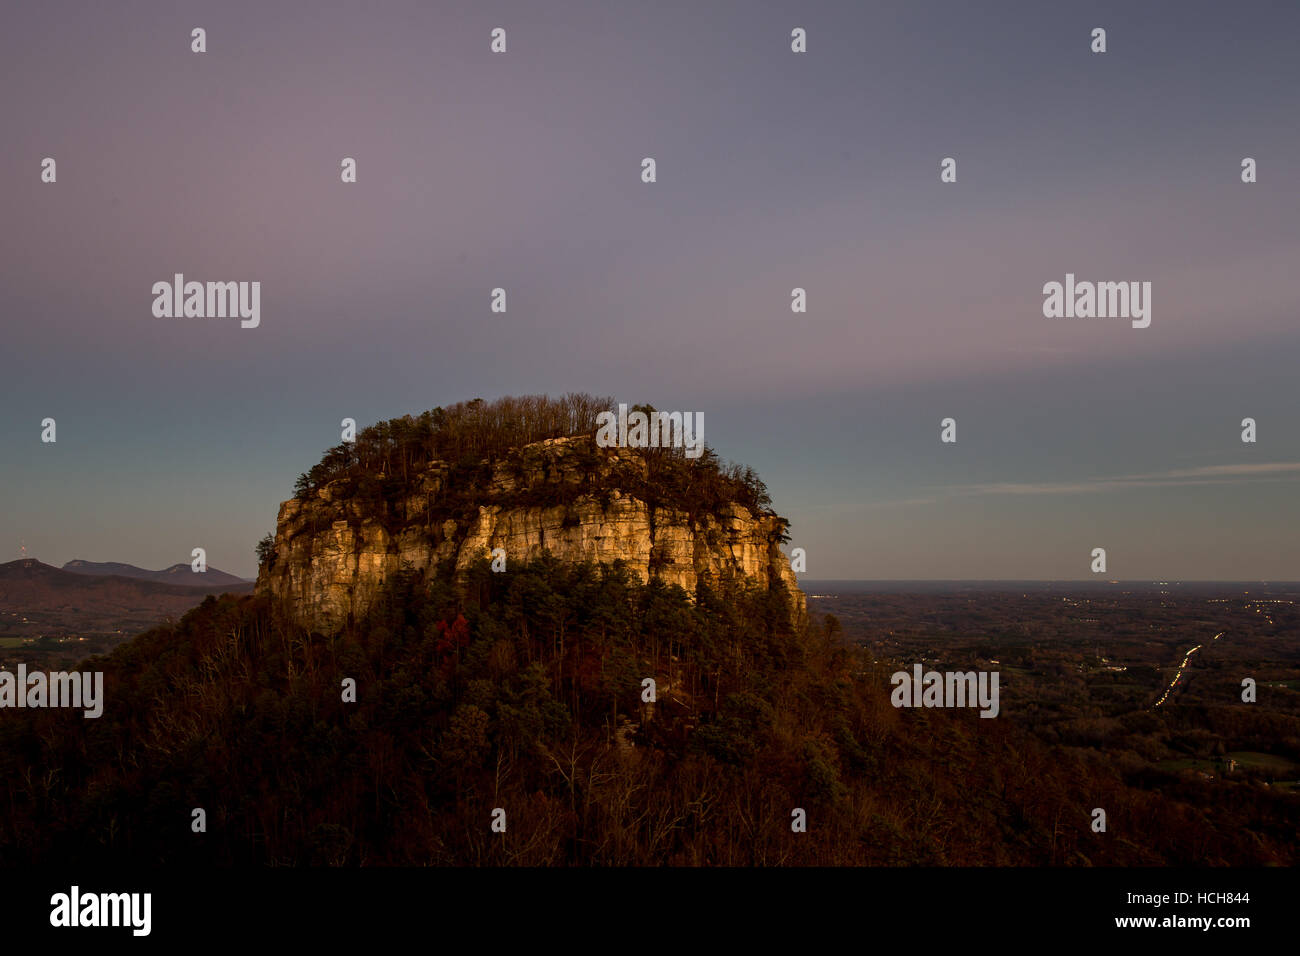 Big Pinnacle of Pilot Mountain in North Carolina, USA with sunset pink clouds and lights from cars on a highway in the distance Stock Photo